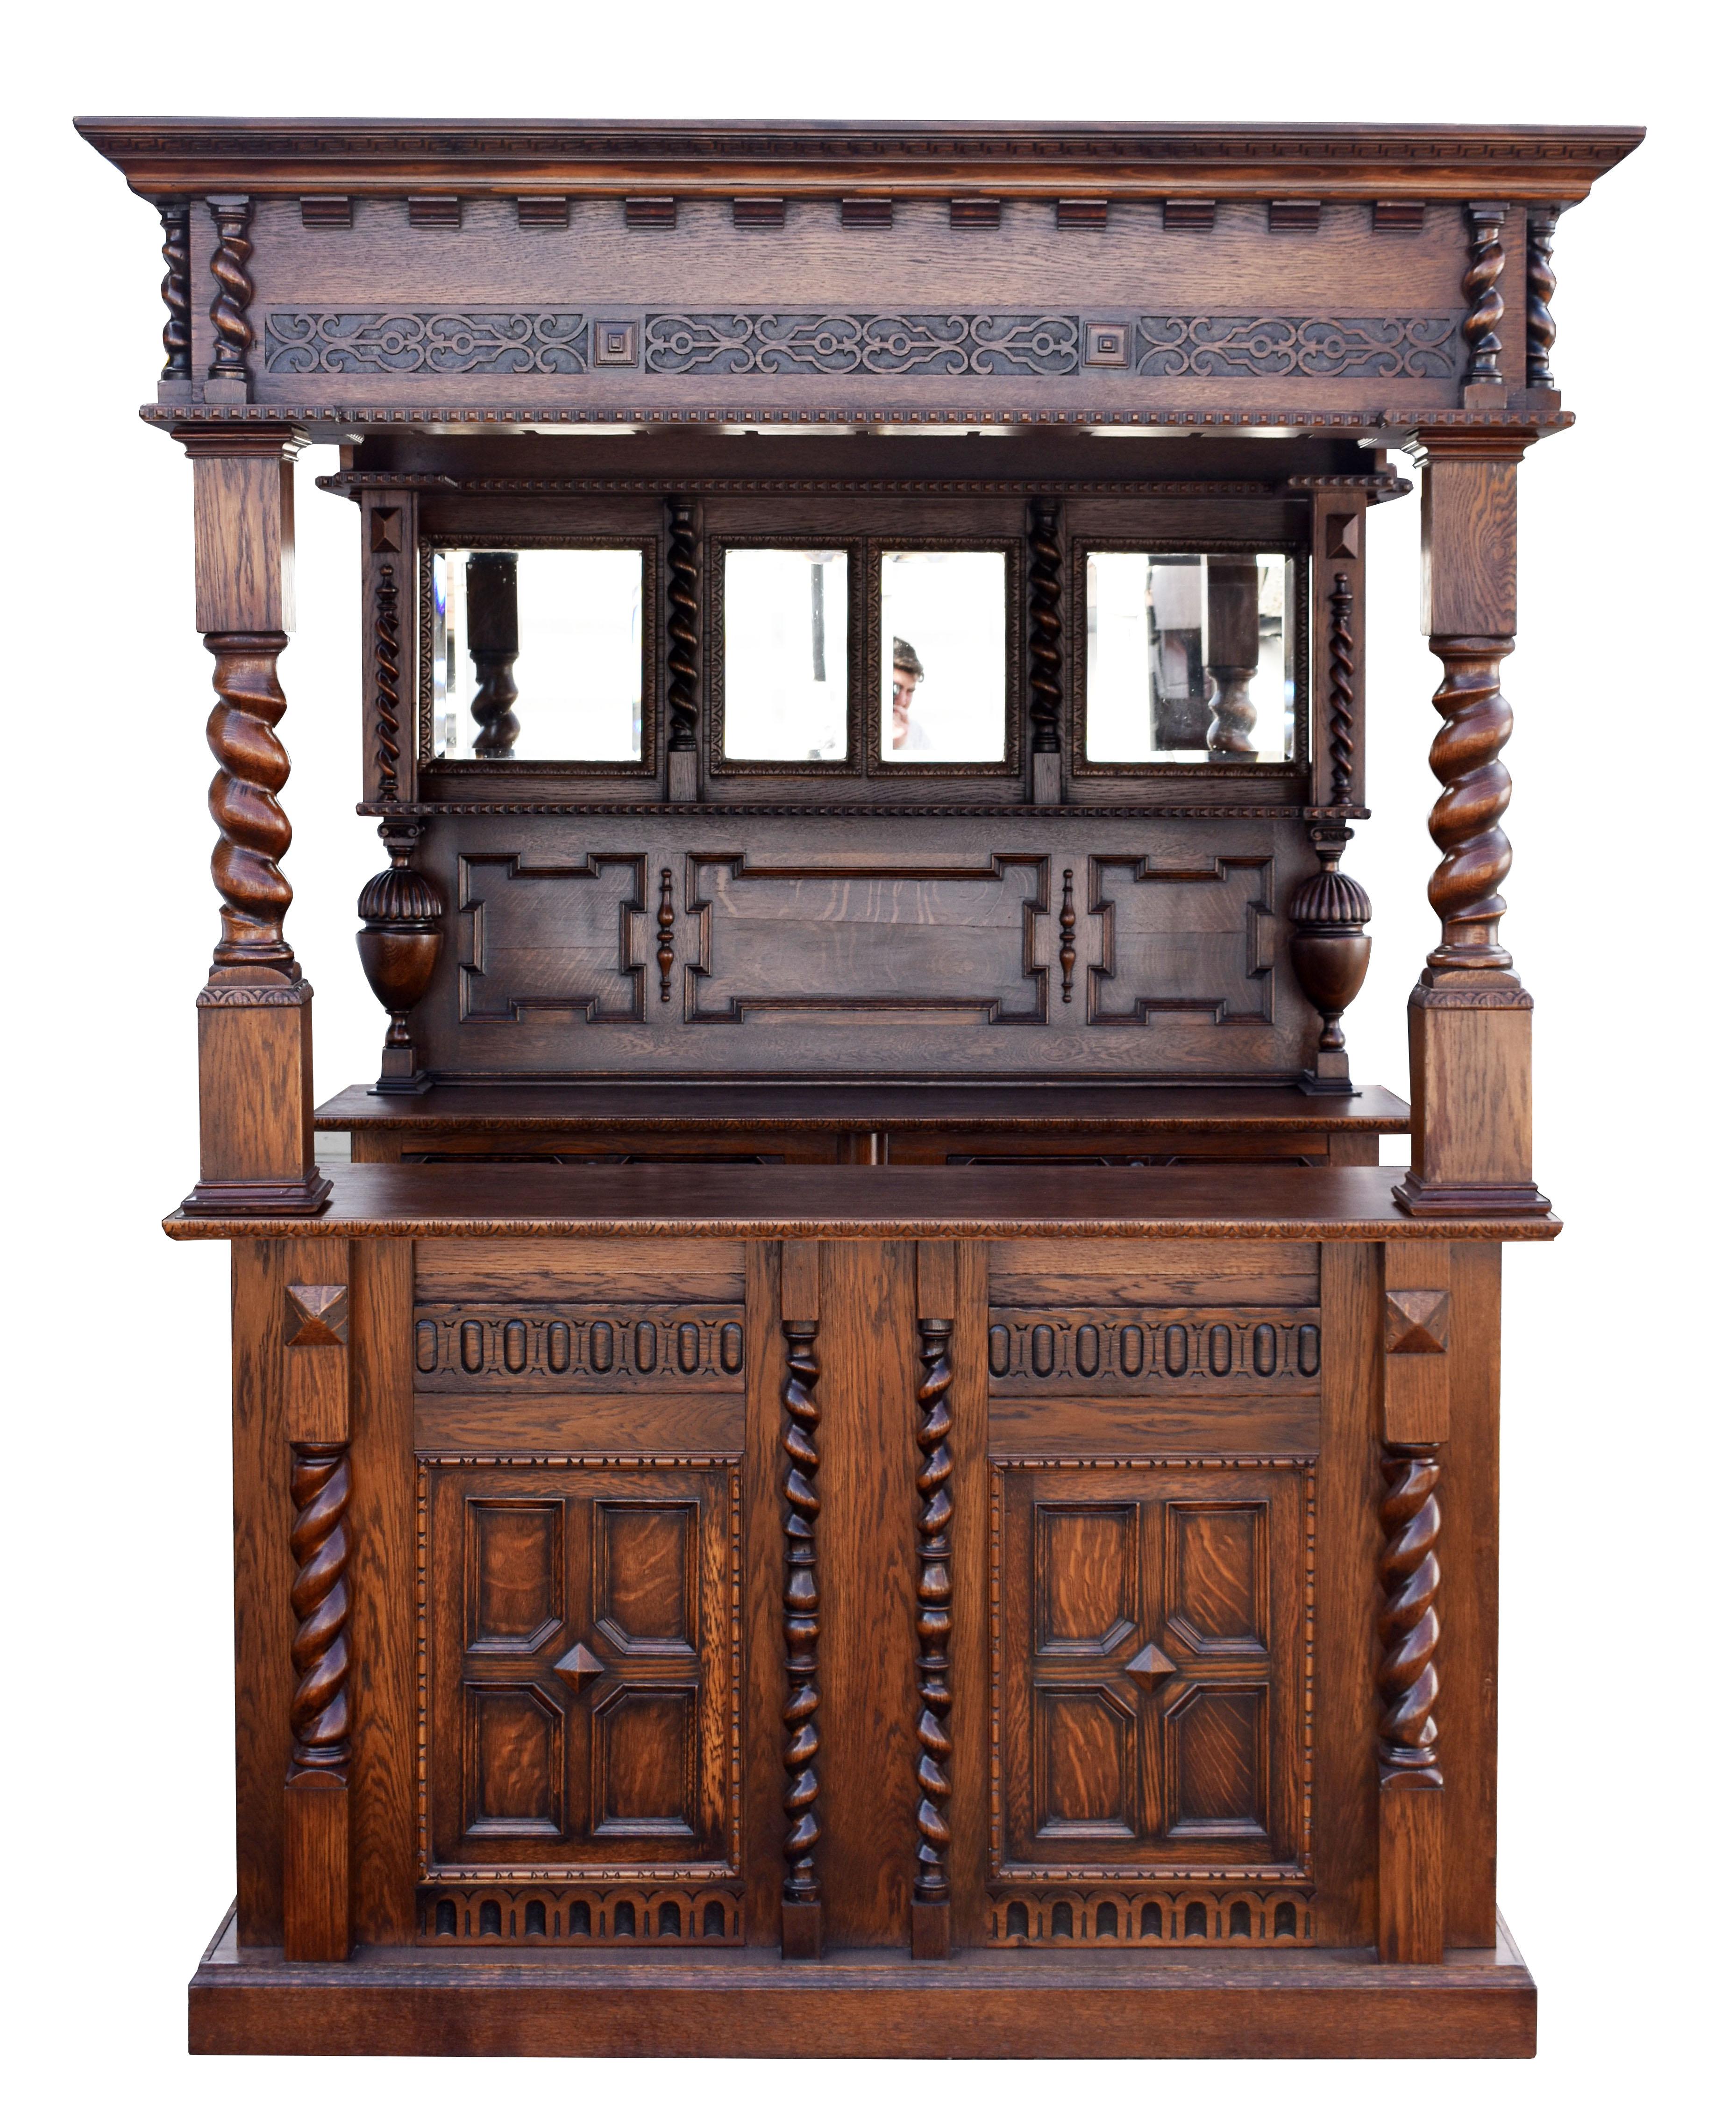 For sale is an early 20th century Jacobean style carved oak front and back bar. The canopy, having nicely turned barley twist columns to the corners and a carved panel in the centre, also features a leaded glass panel in the ceiling. This is